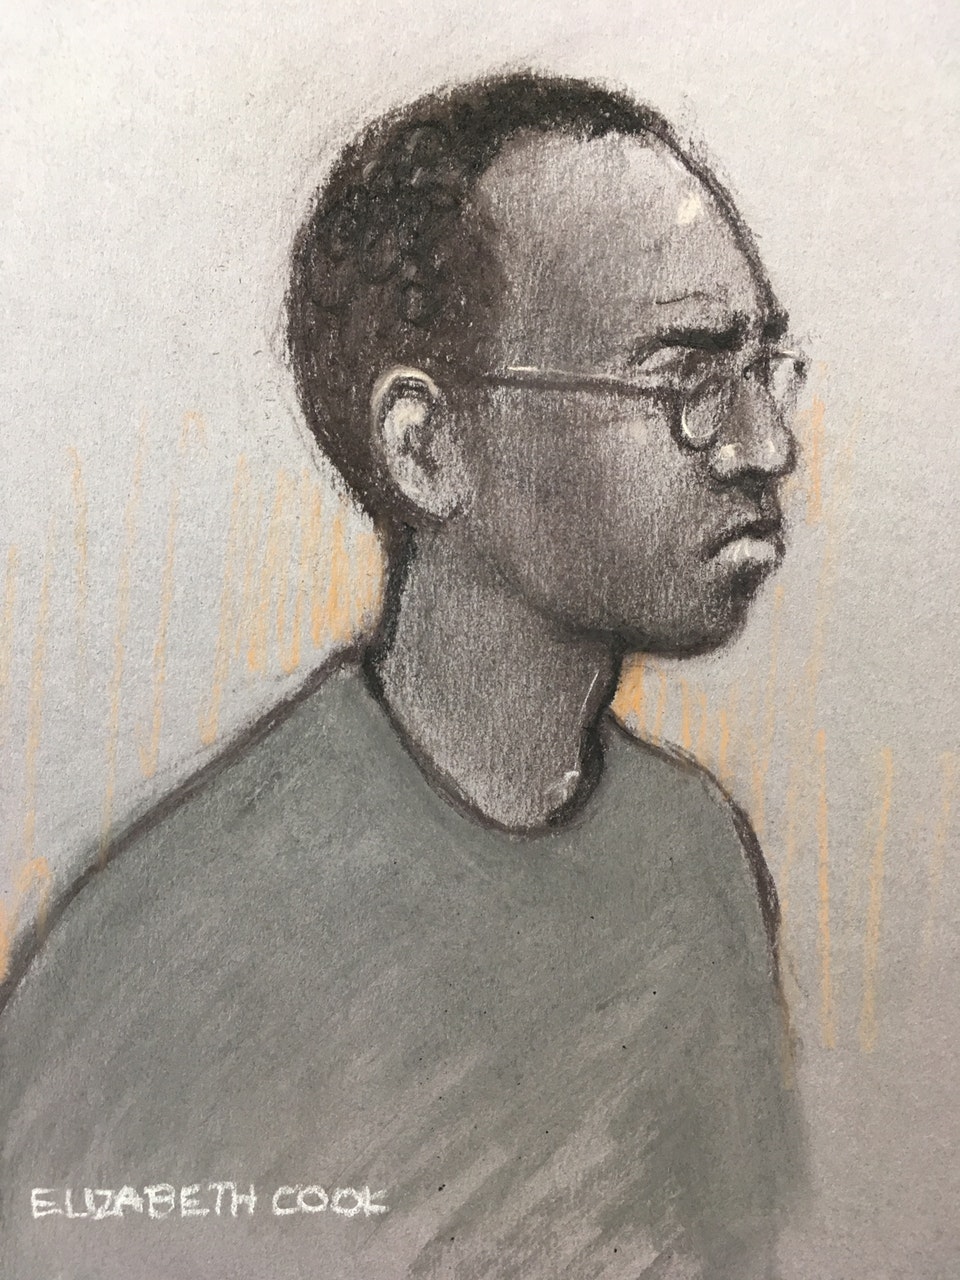 Darren Pencille, 36, launched an “unrelenting” and “savage” knife attack on 51-year-old Mr Pomeroy following a heated argument over aisle blocking in front of the victim’s 14-year-old son on a Guildford to London train.